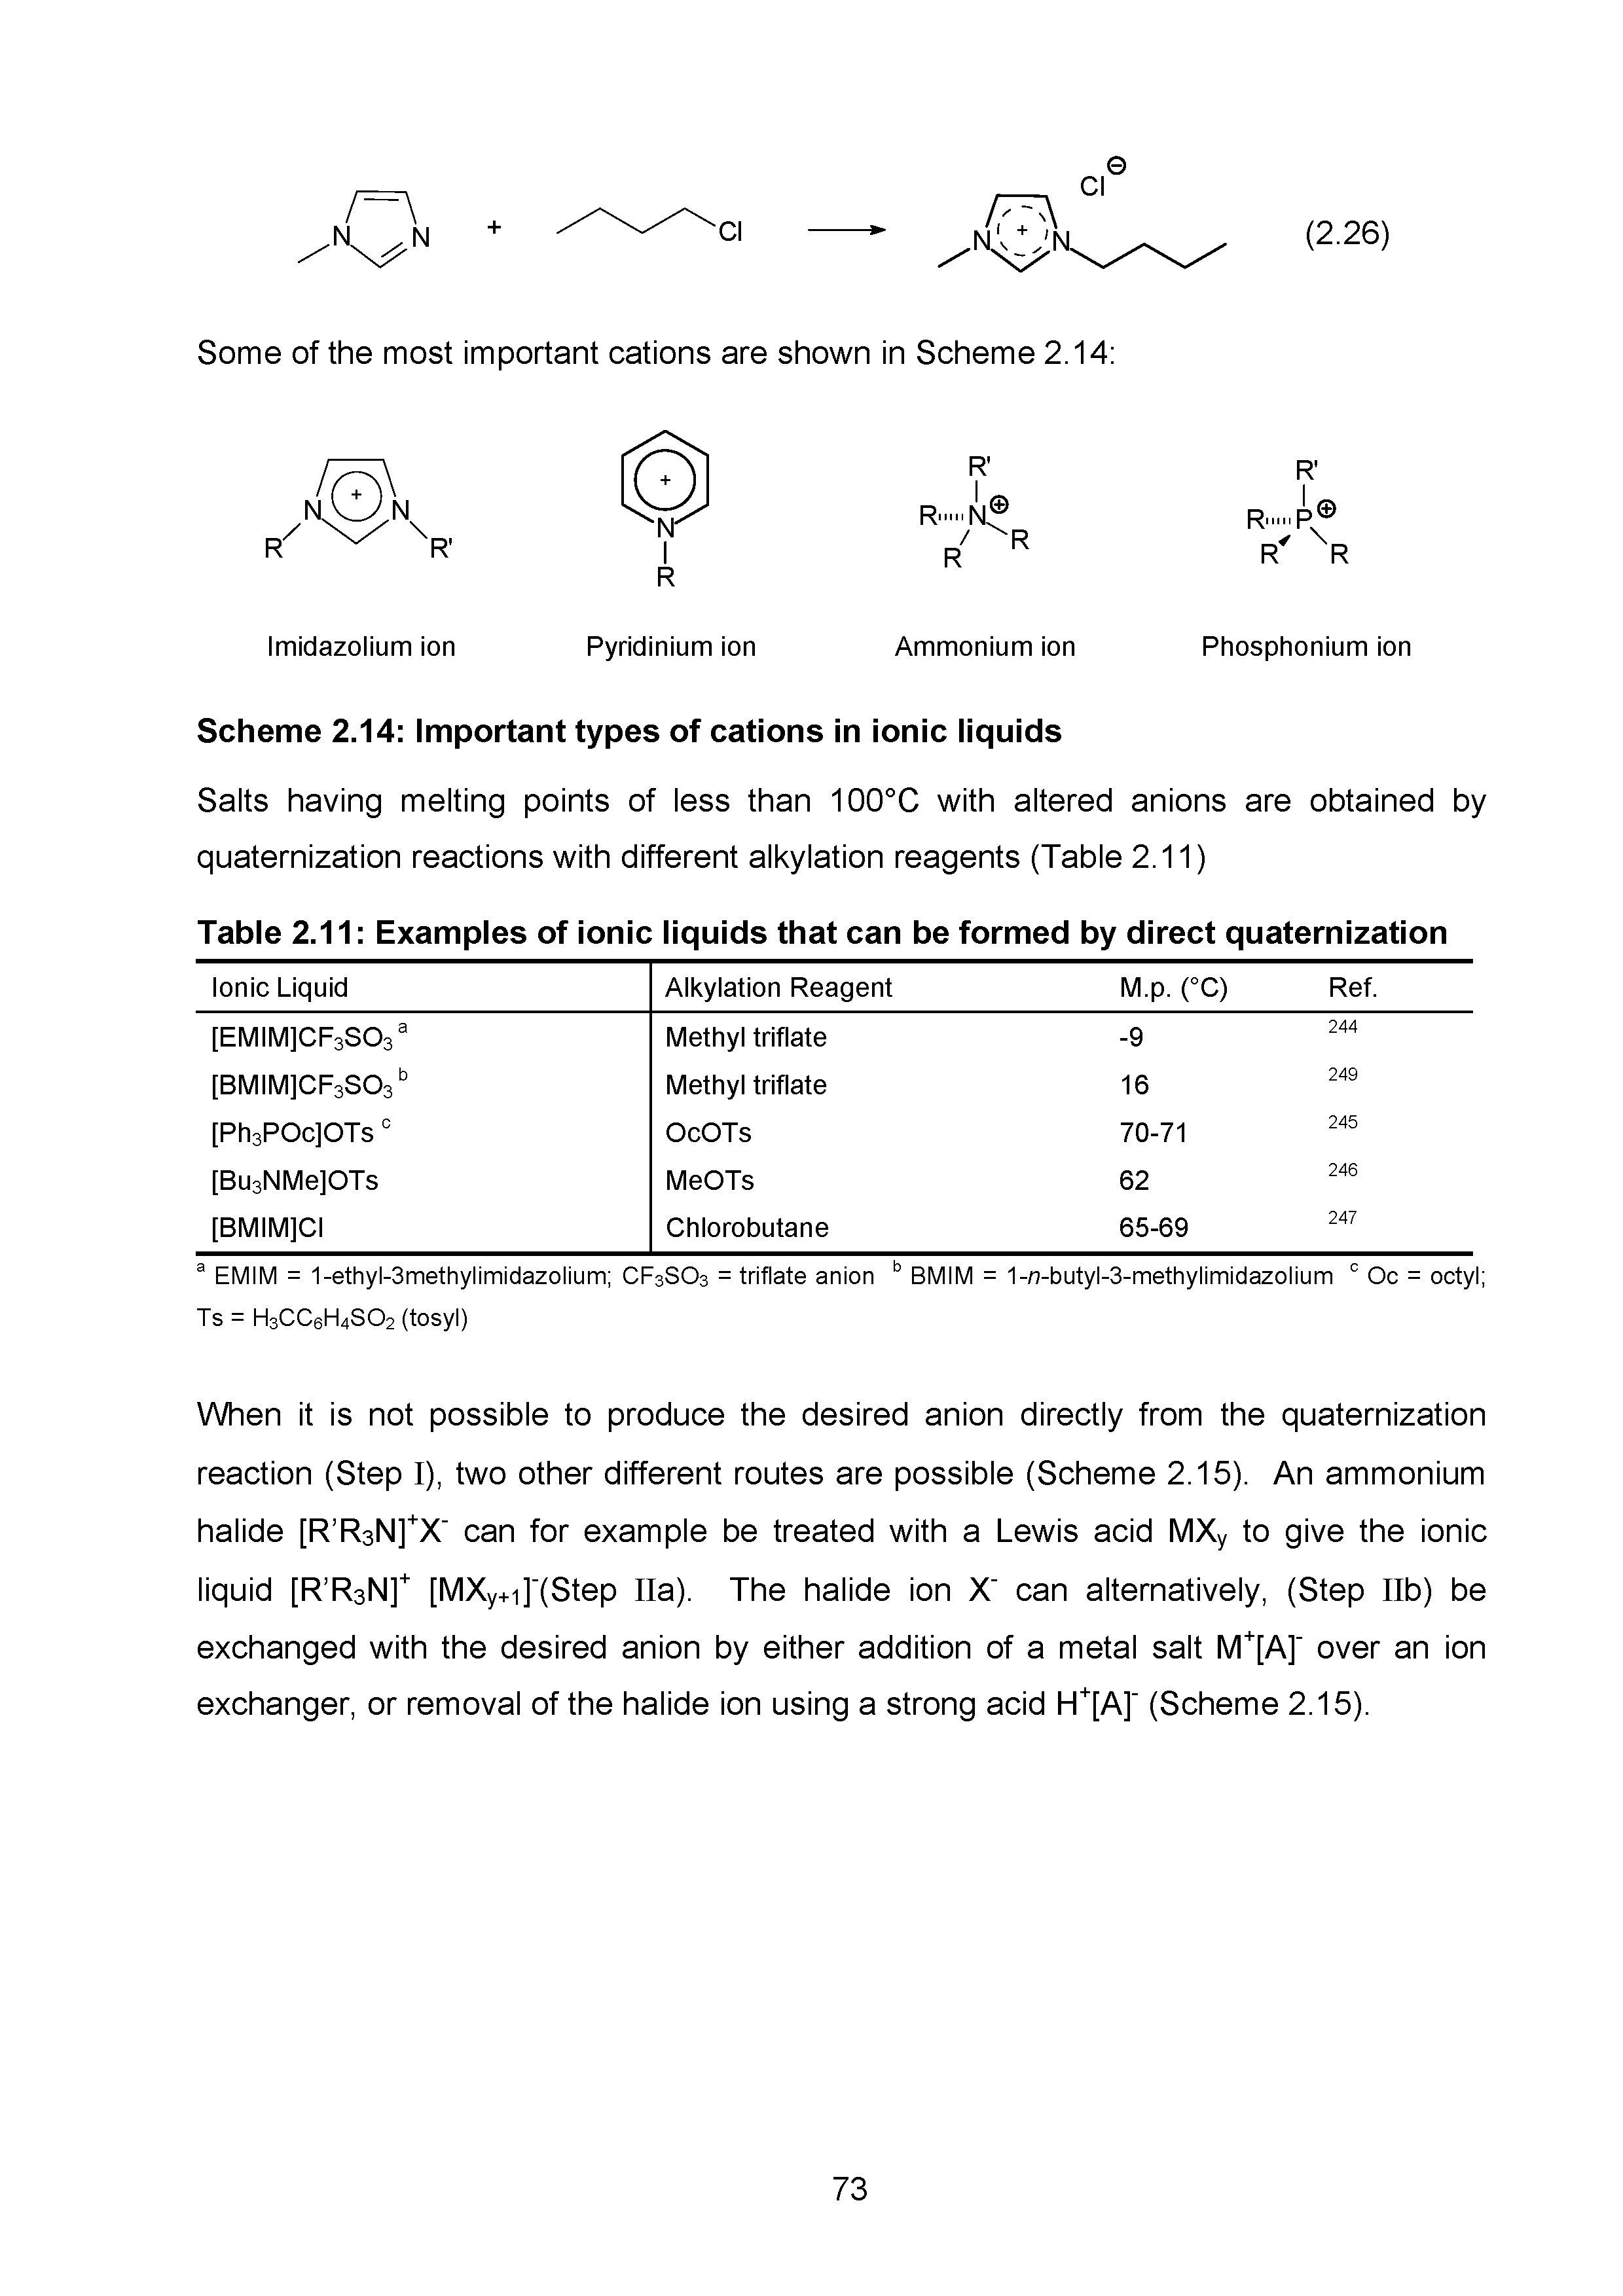 Scheme 2.14 Important types of cations in ionic liquids...